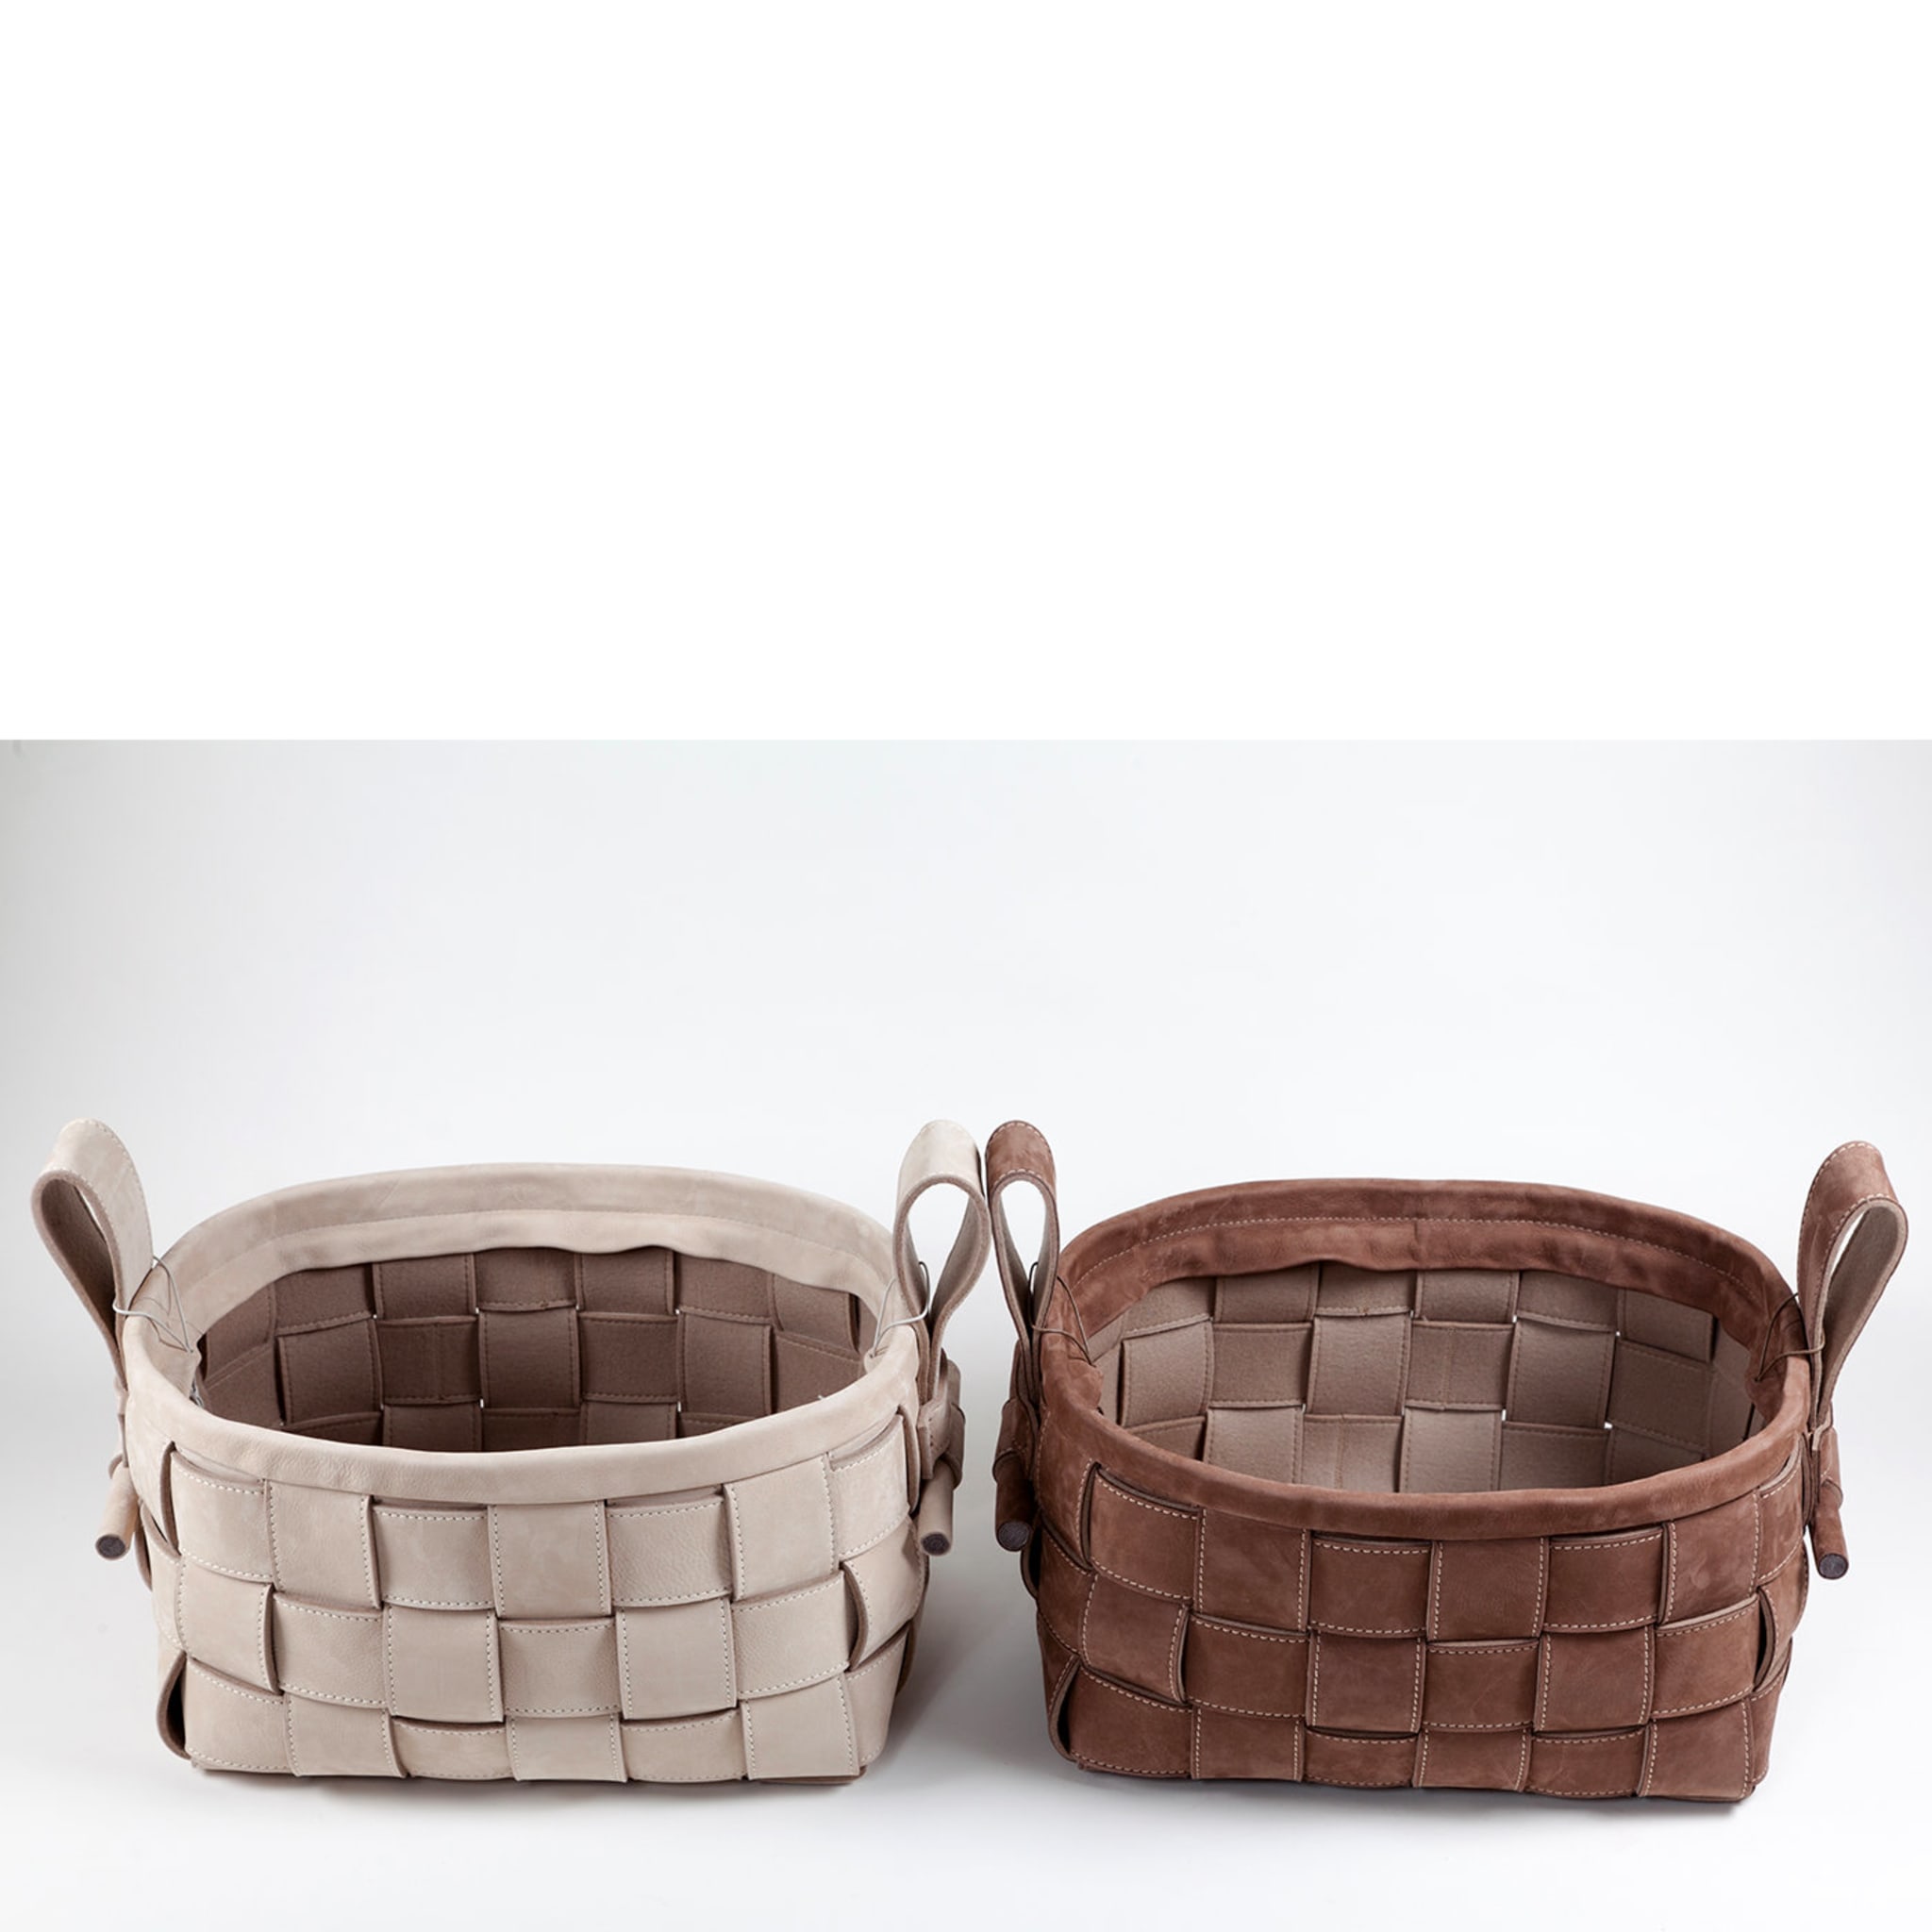 Woven Leather Basket Gray - Alternative view 4